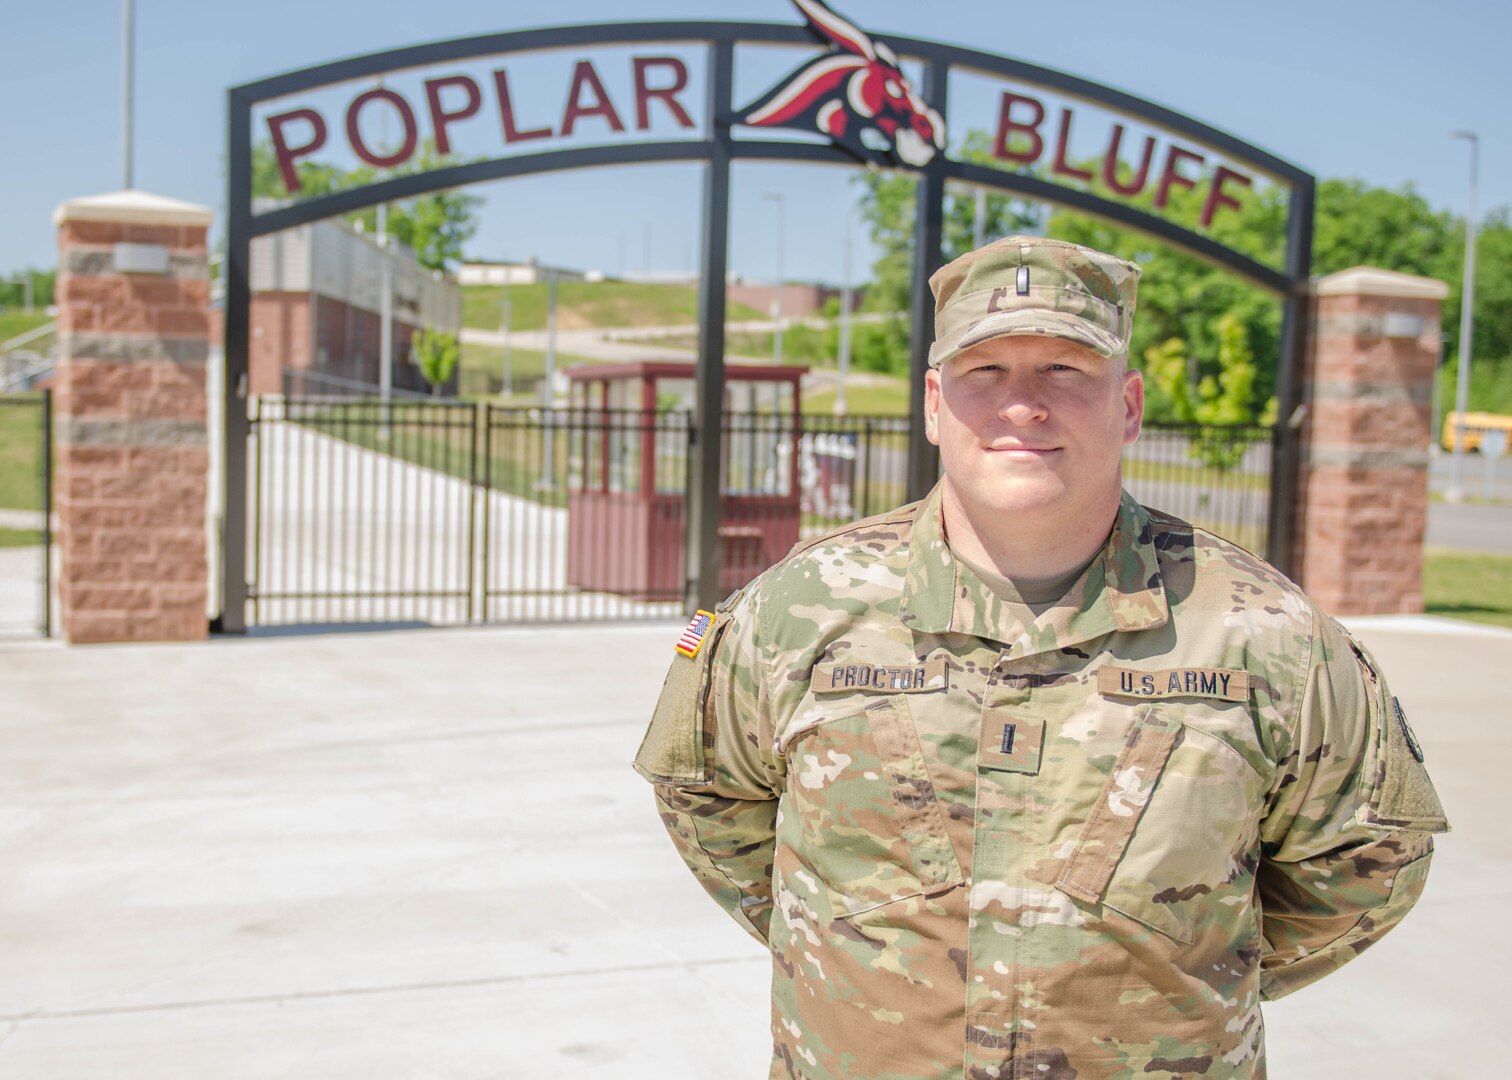 First Lt. Kacey Proctor, the officer in charge of the Missouri Army National Guard’s 1138th Engineer Company out of Farmington, Missouri, volunteered for state emergency duty when flood waters threatened his childhood home in Poplar Bluff.